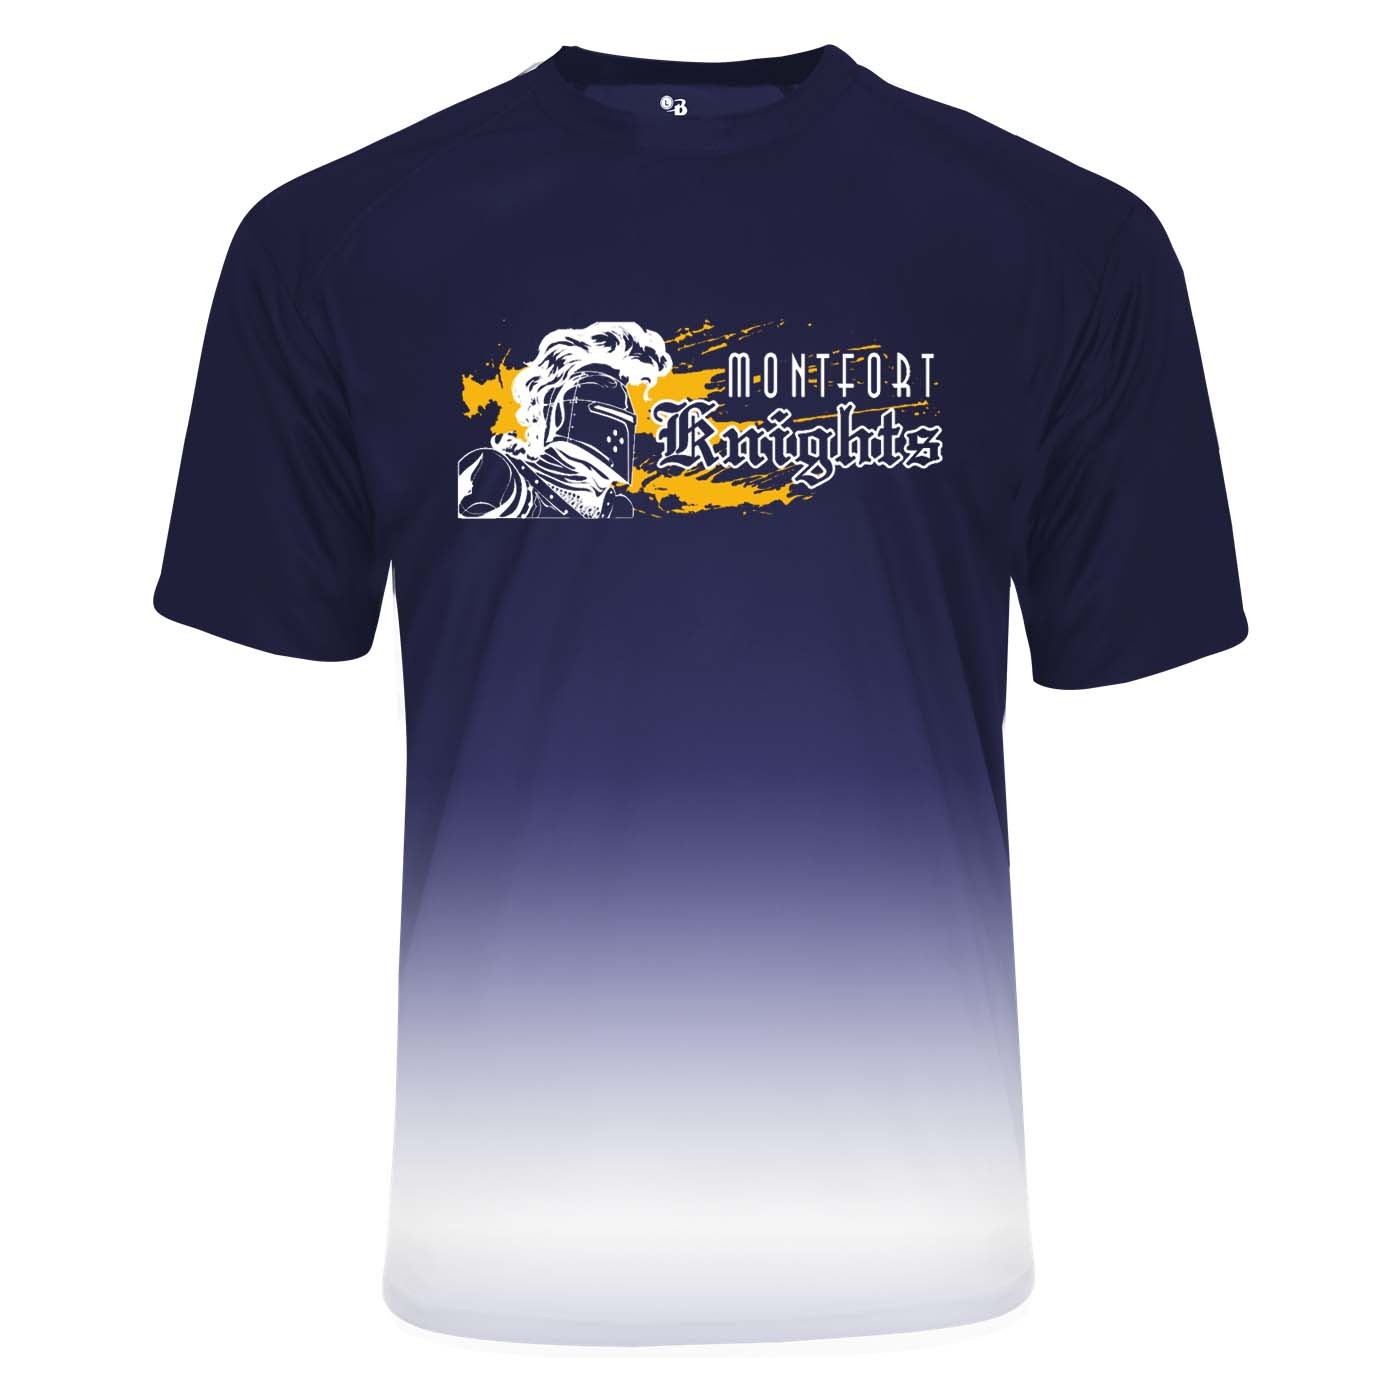 MONTFORT Spirit Reverse Ombre S/S T-Shirt w/ White Knight Logo - Please Allow 2-3 Weeks for Delivery